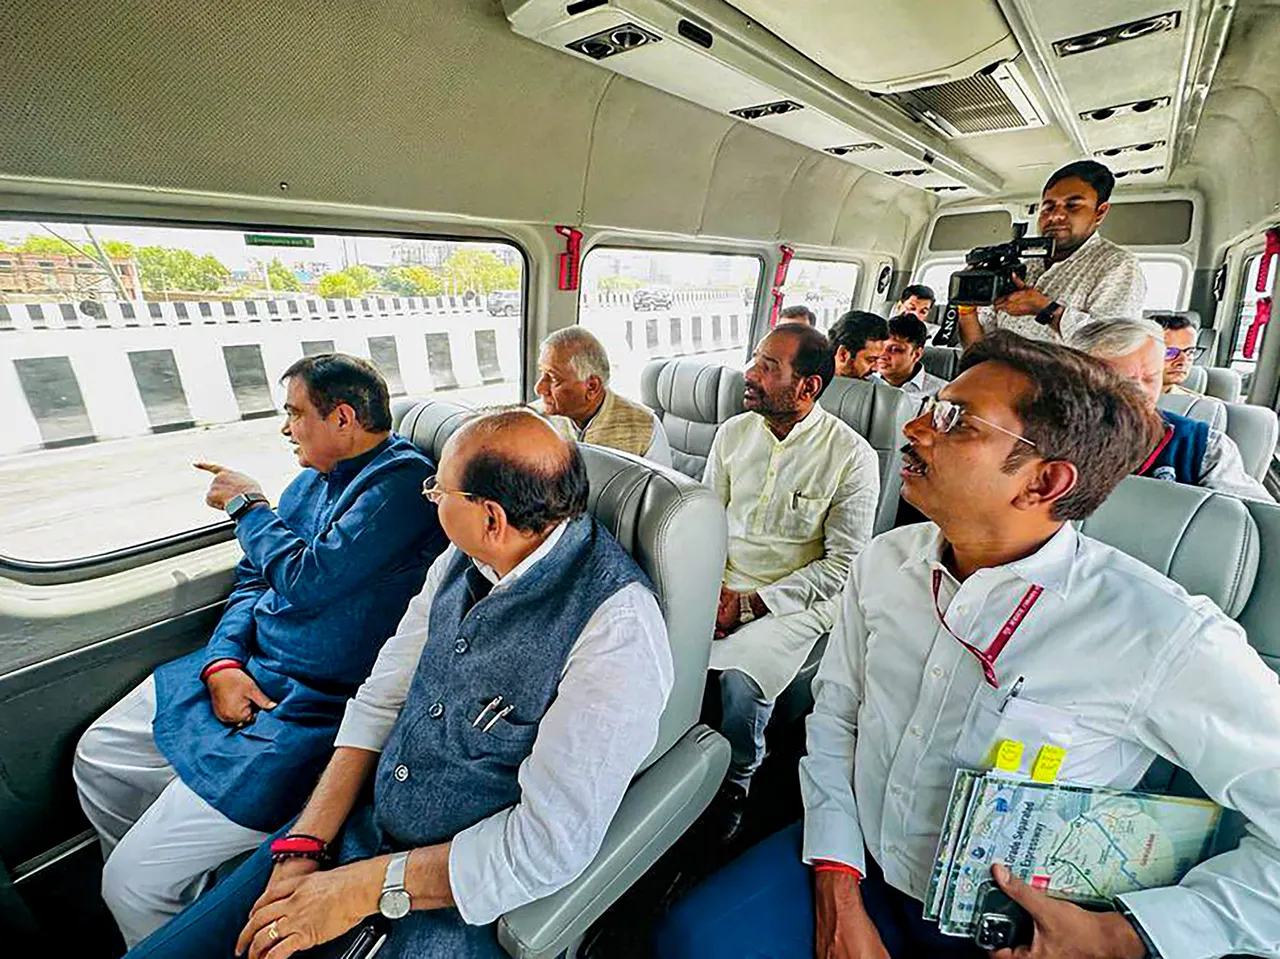 Union Minister for Road Transport and Highways Nitin Gadkari with Union MoS for Road Transport and Highways VK Singh, Delhi Lt. Governor Vinai Kumar Saxena and others inspects the under-construction 29.6 km, 8 lane access control Dwarka Expressway, in New Delhi